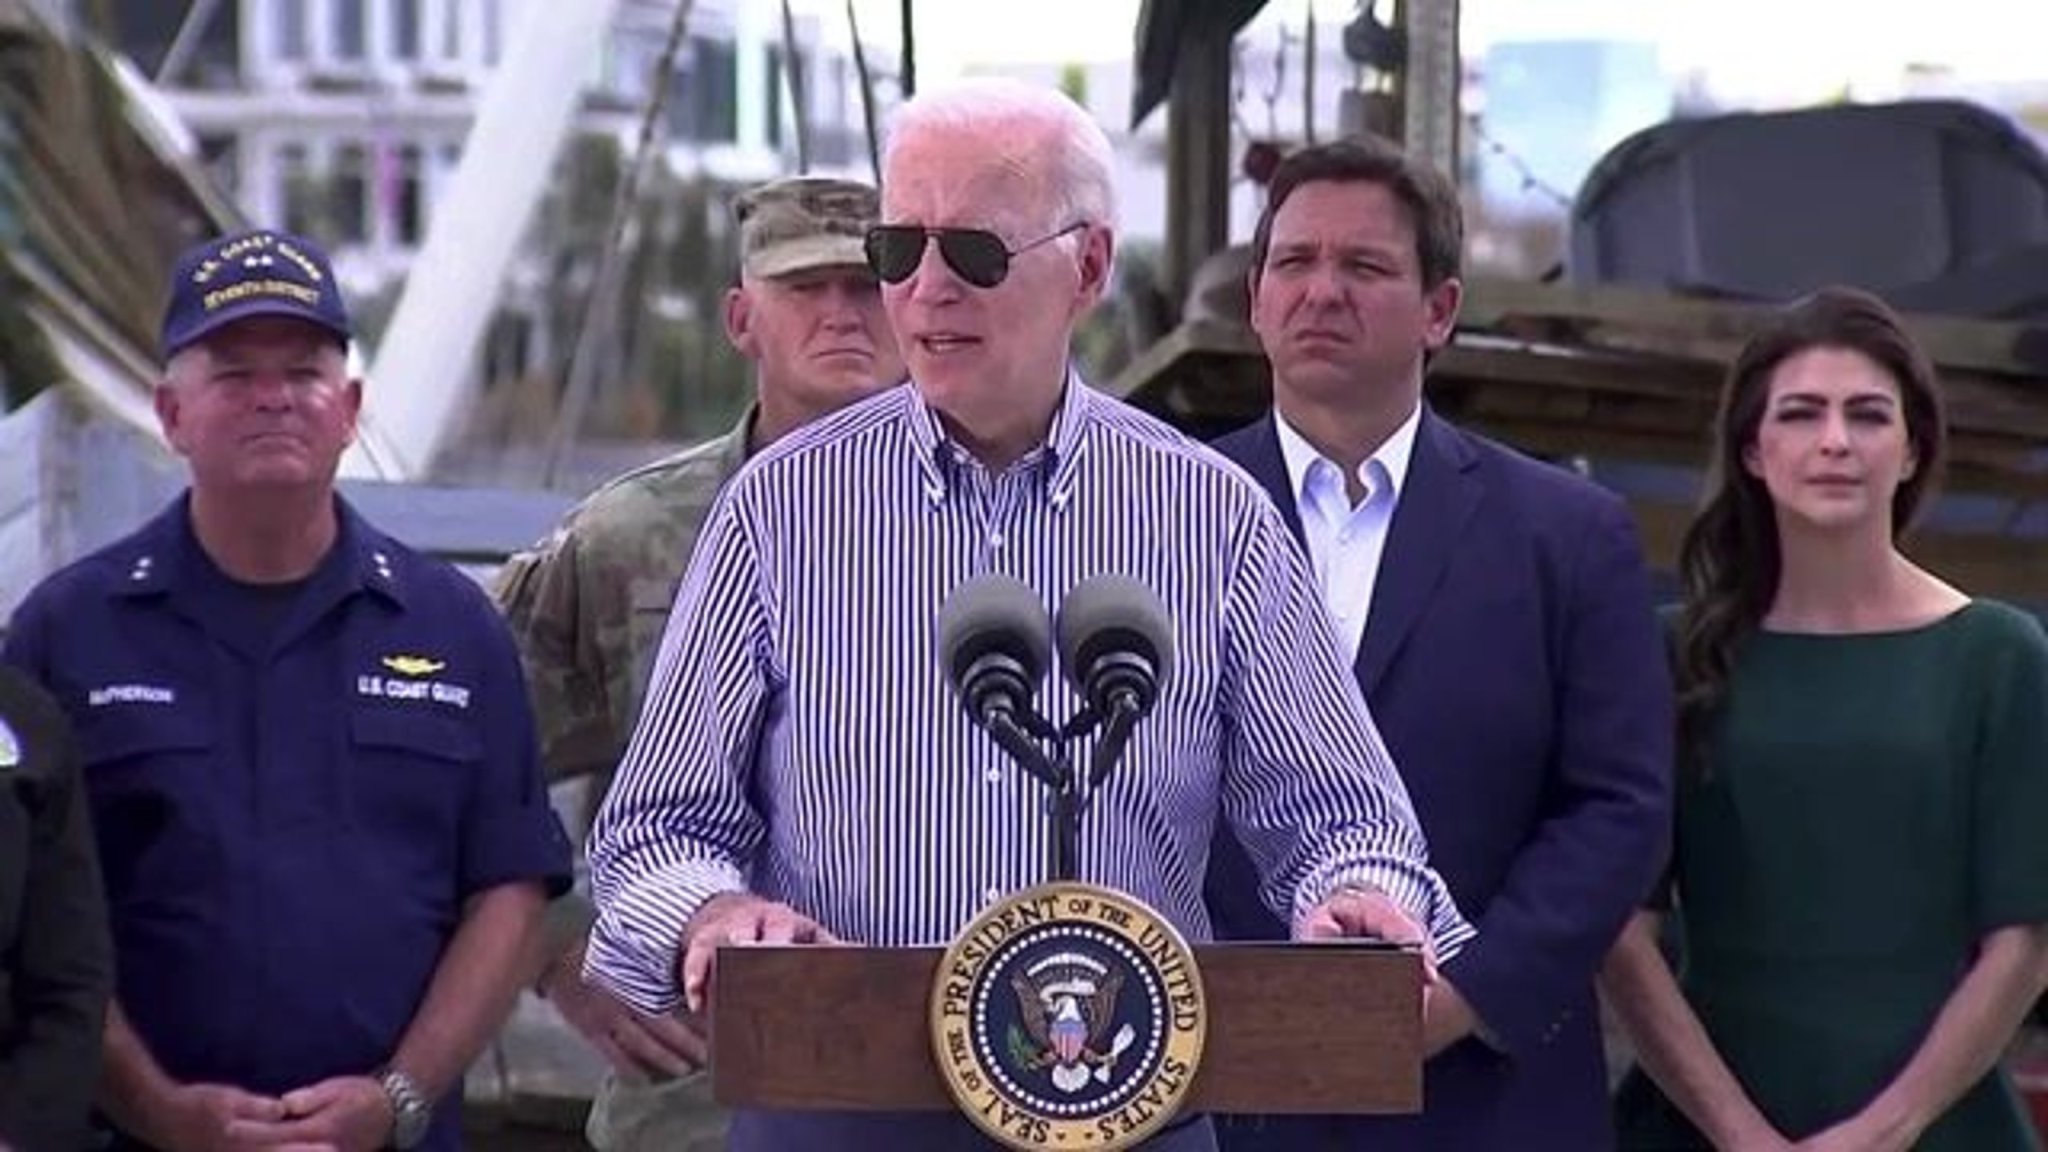 Biden: “The one thing [Hurricane Ian] has finally ended is the discussion about whether or not there’s climate change."